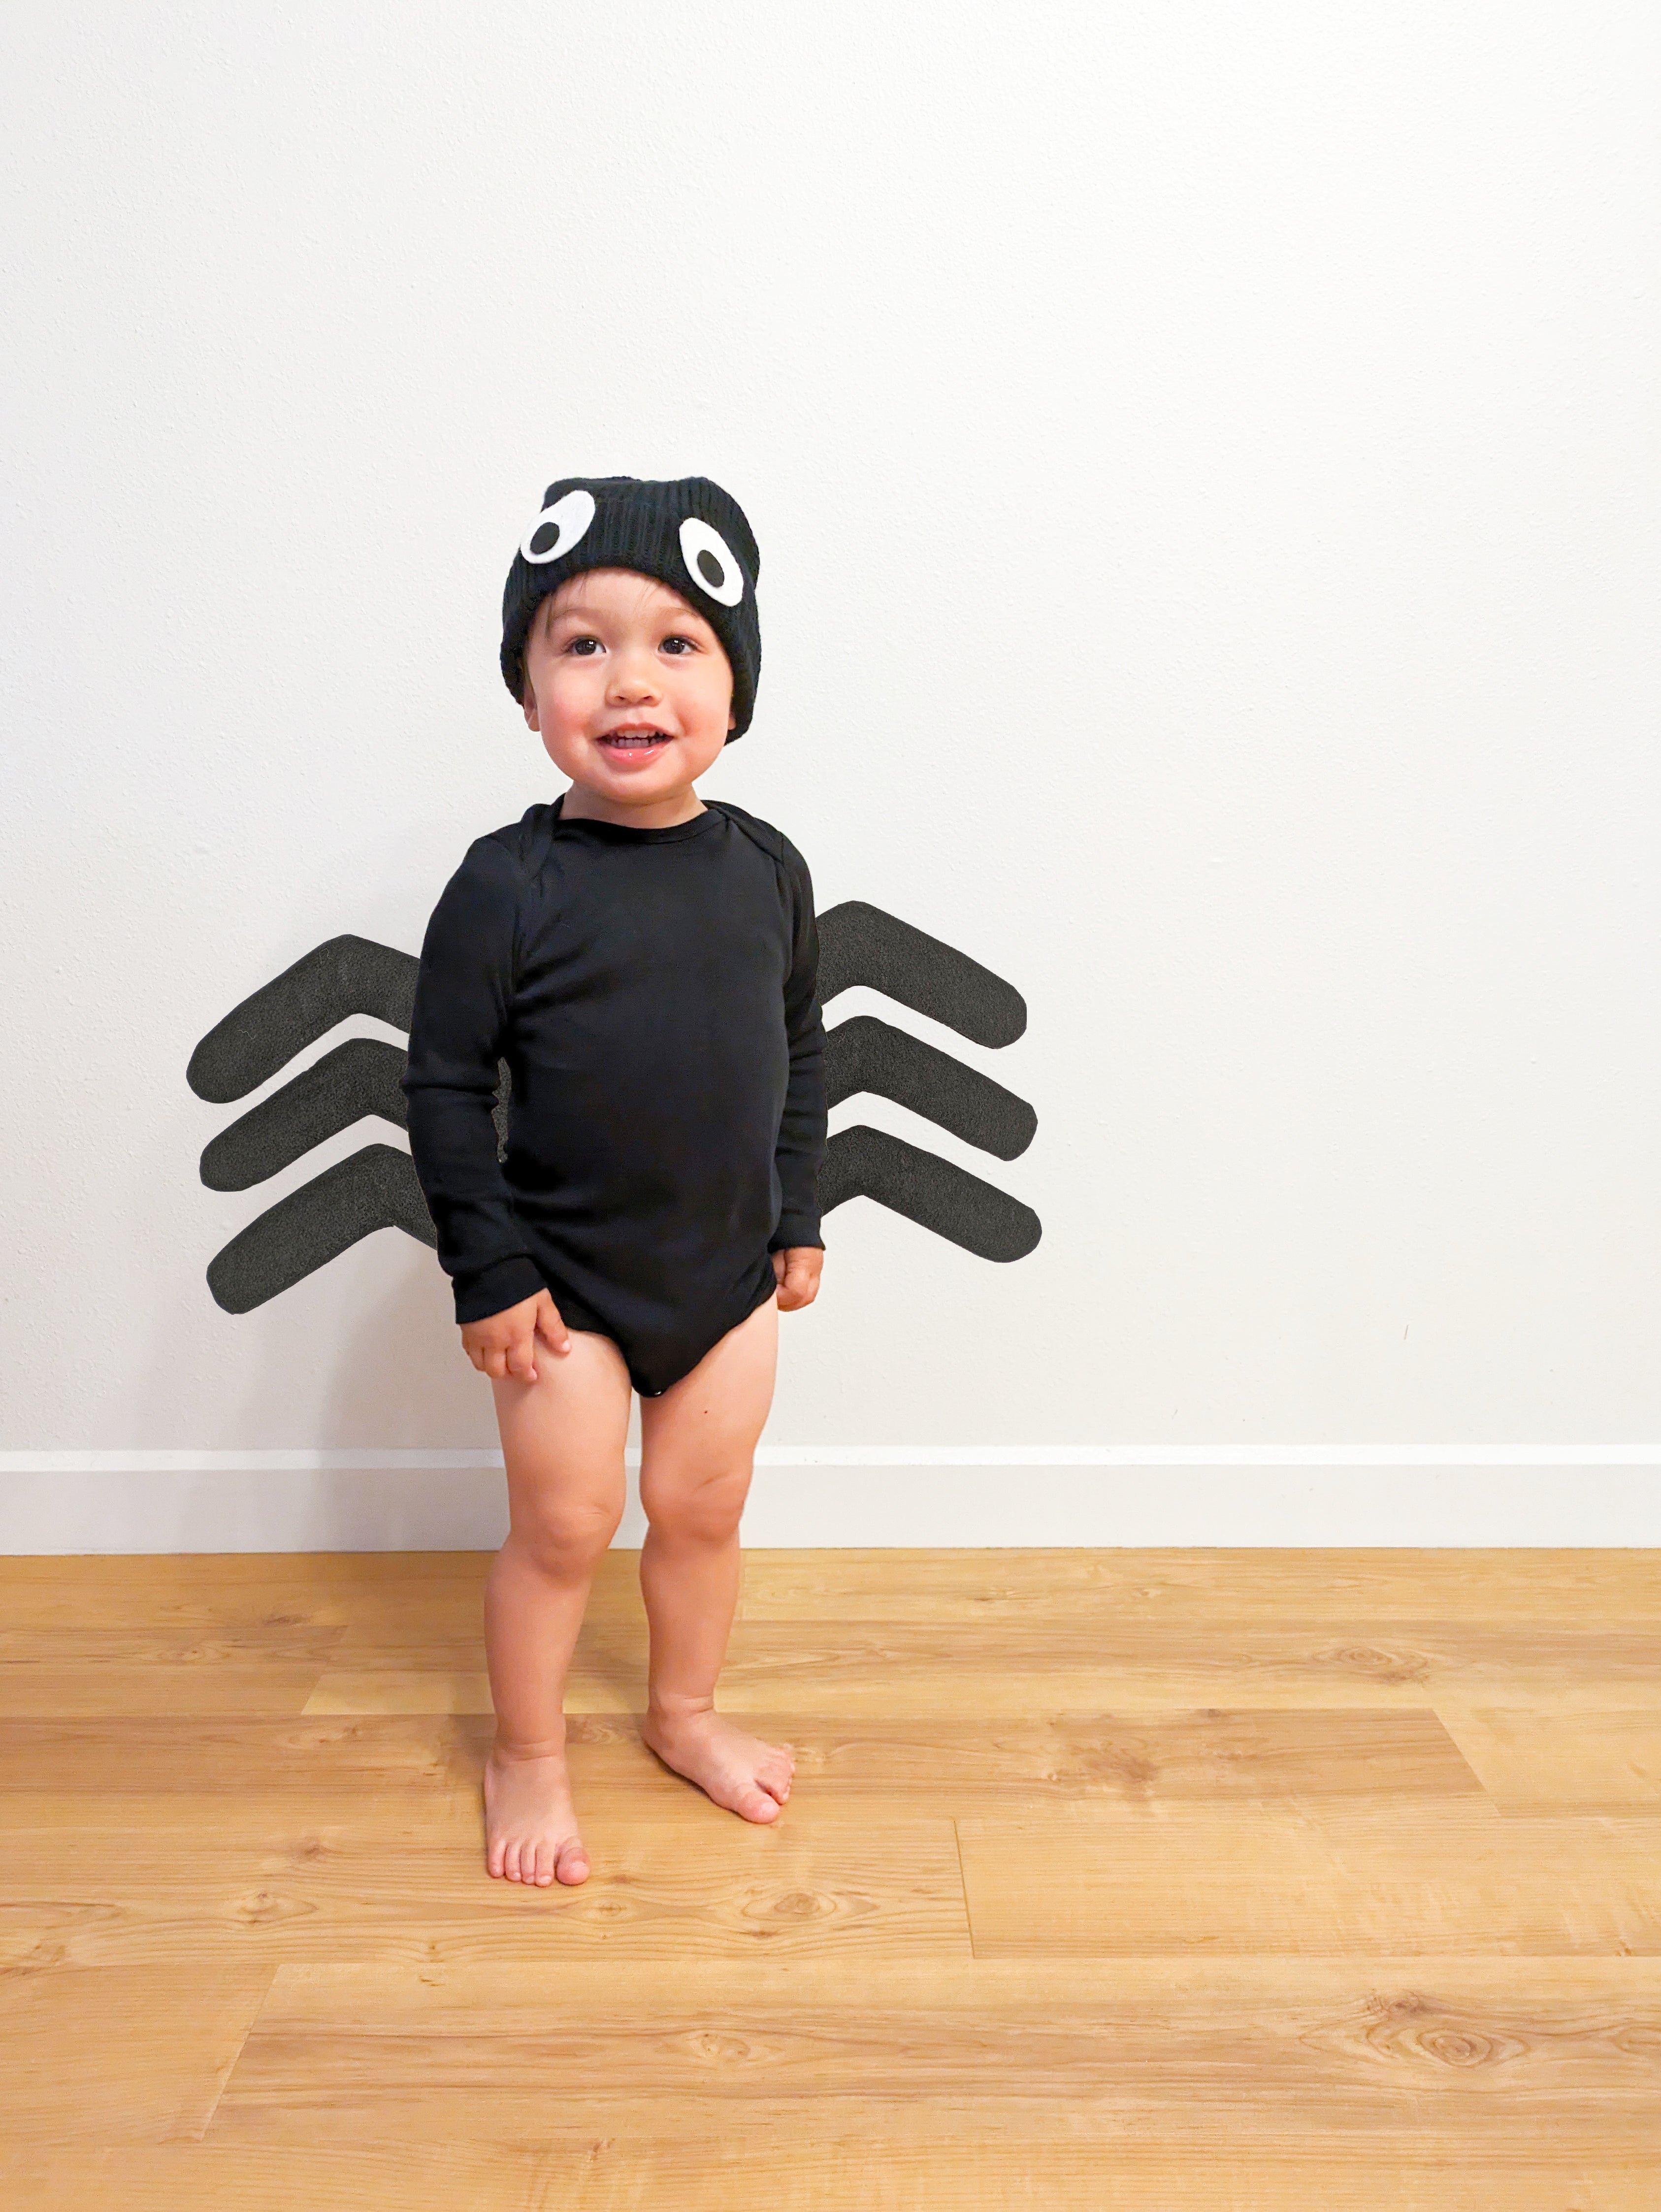 A toddler wearing a DIY Spider costumer, made with a black baby bodysuit, a black hat and homemade spider legs